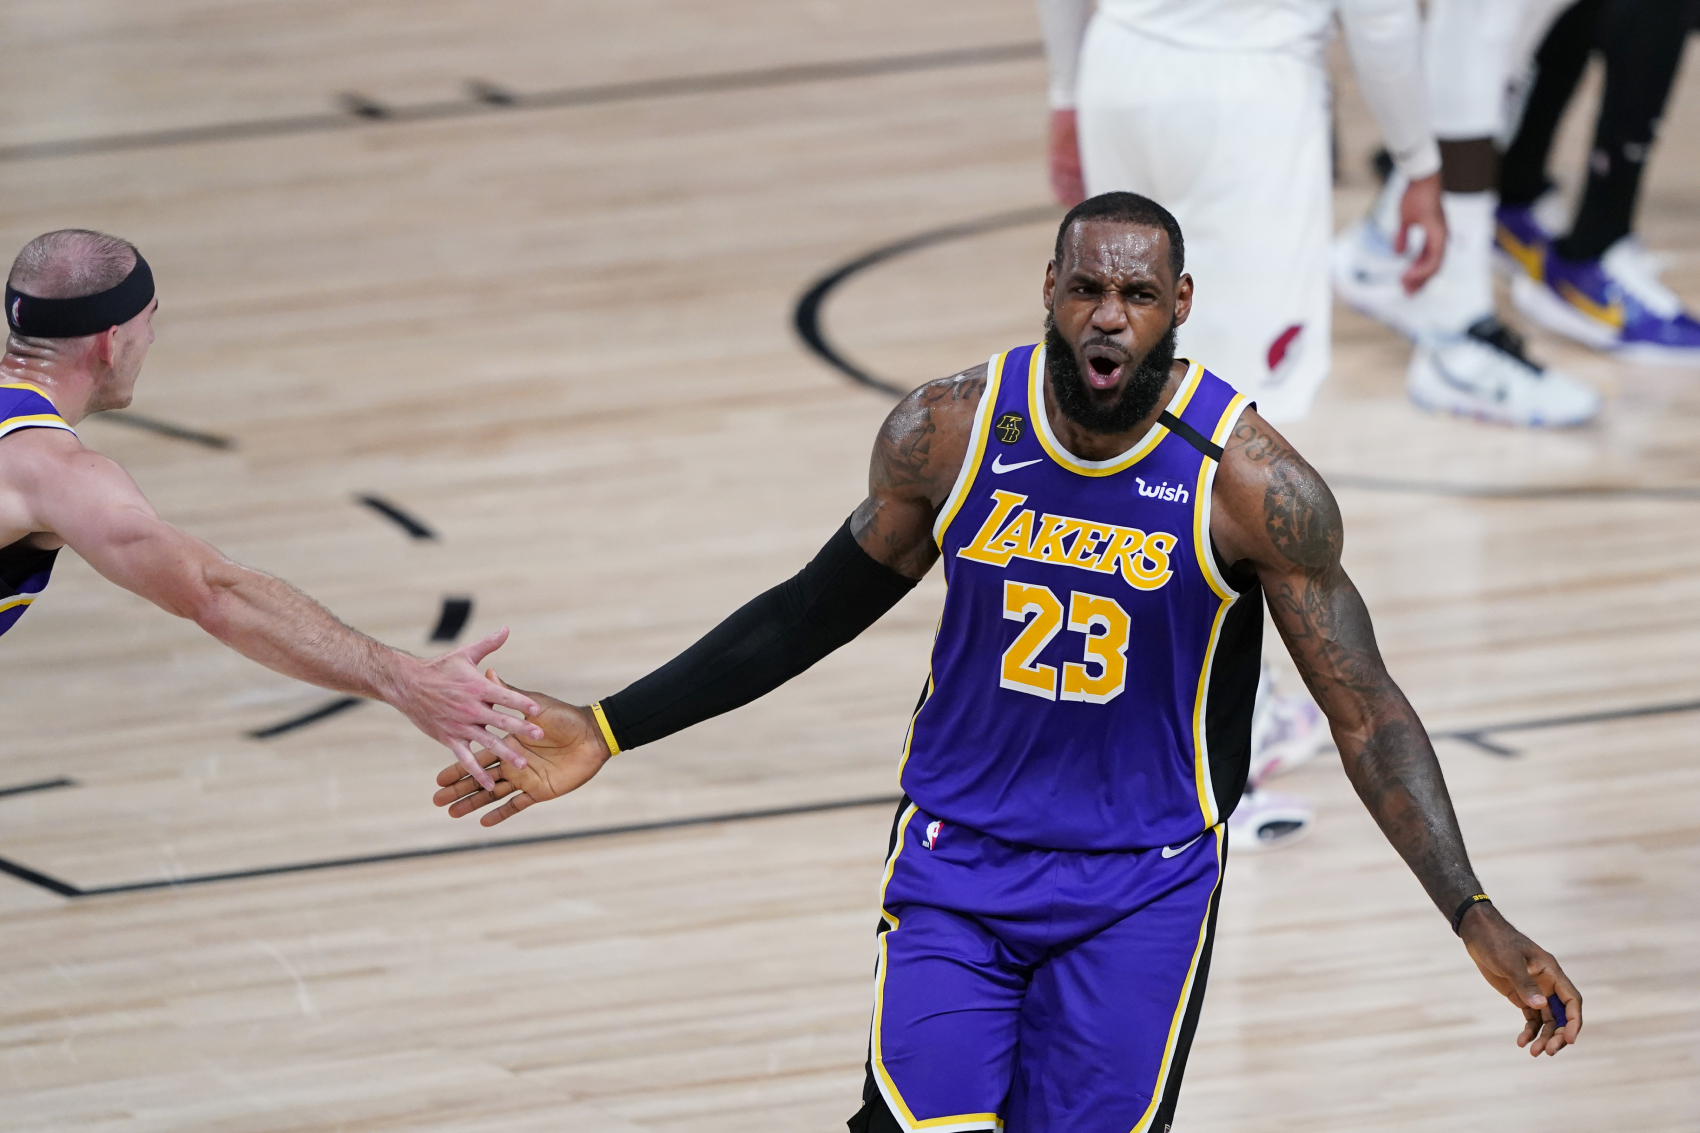 LeBron James and the LA Lakers are in the NBA Finals. Lakers owner Jeanie Buss just revealed how much longer she hopes James plays.